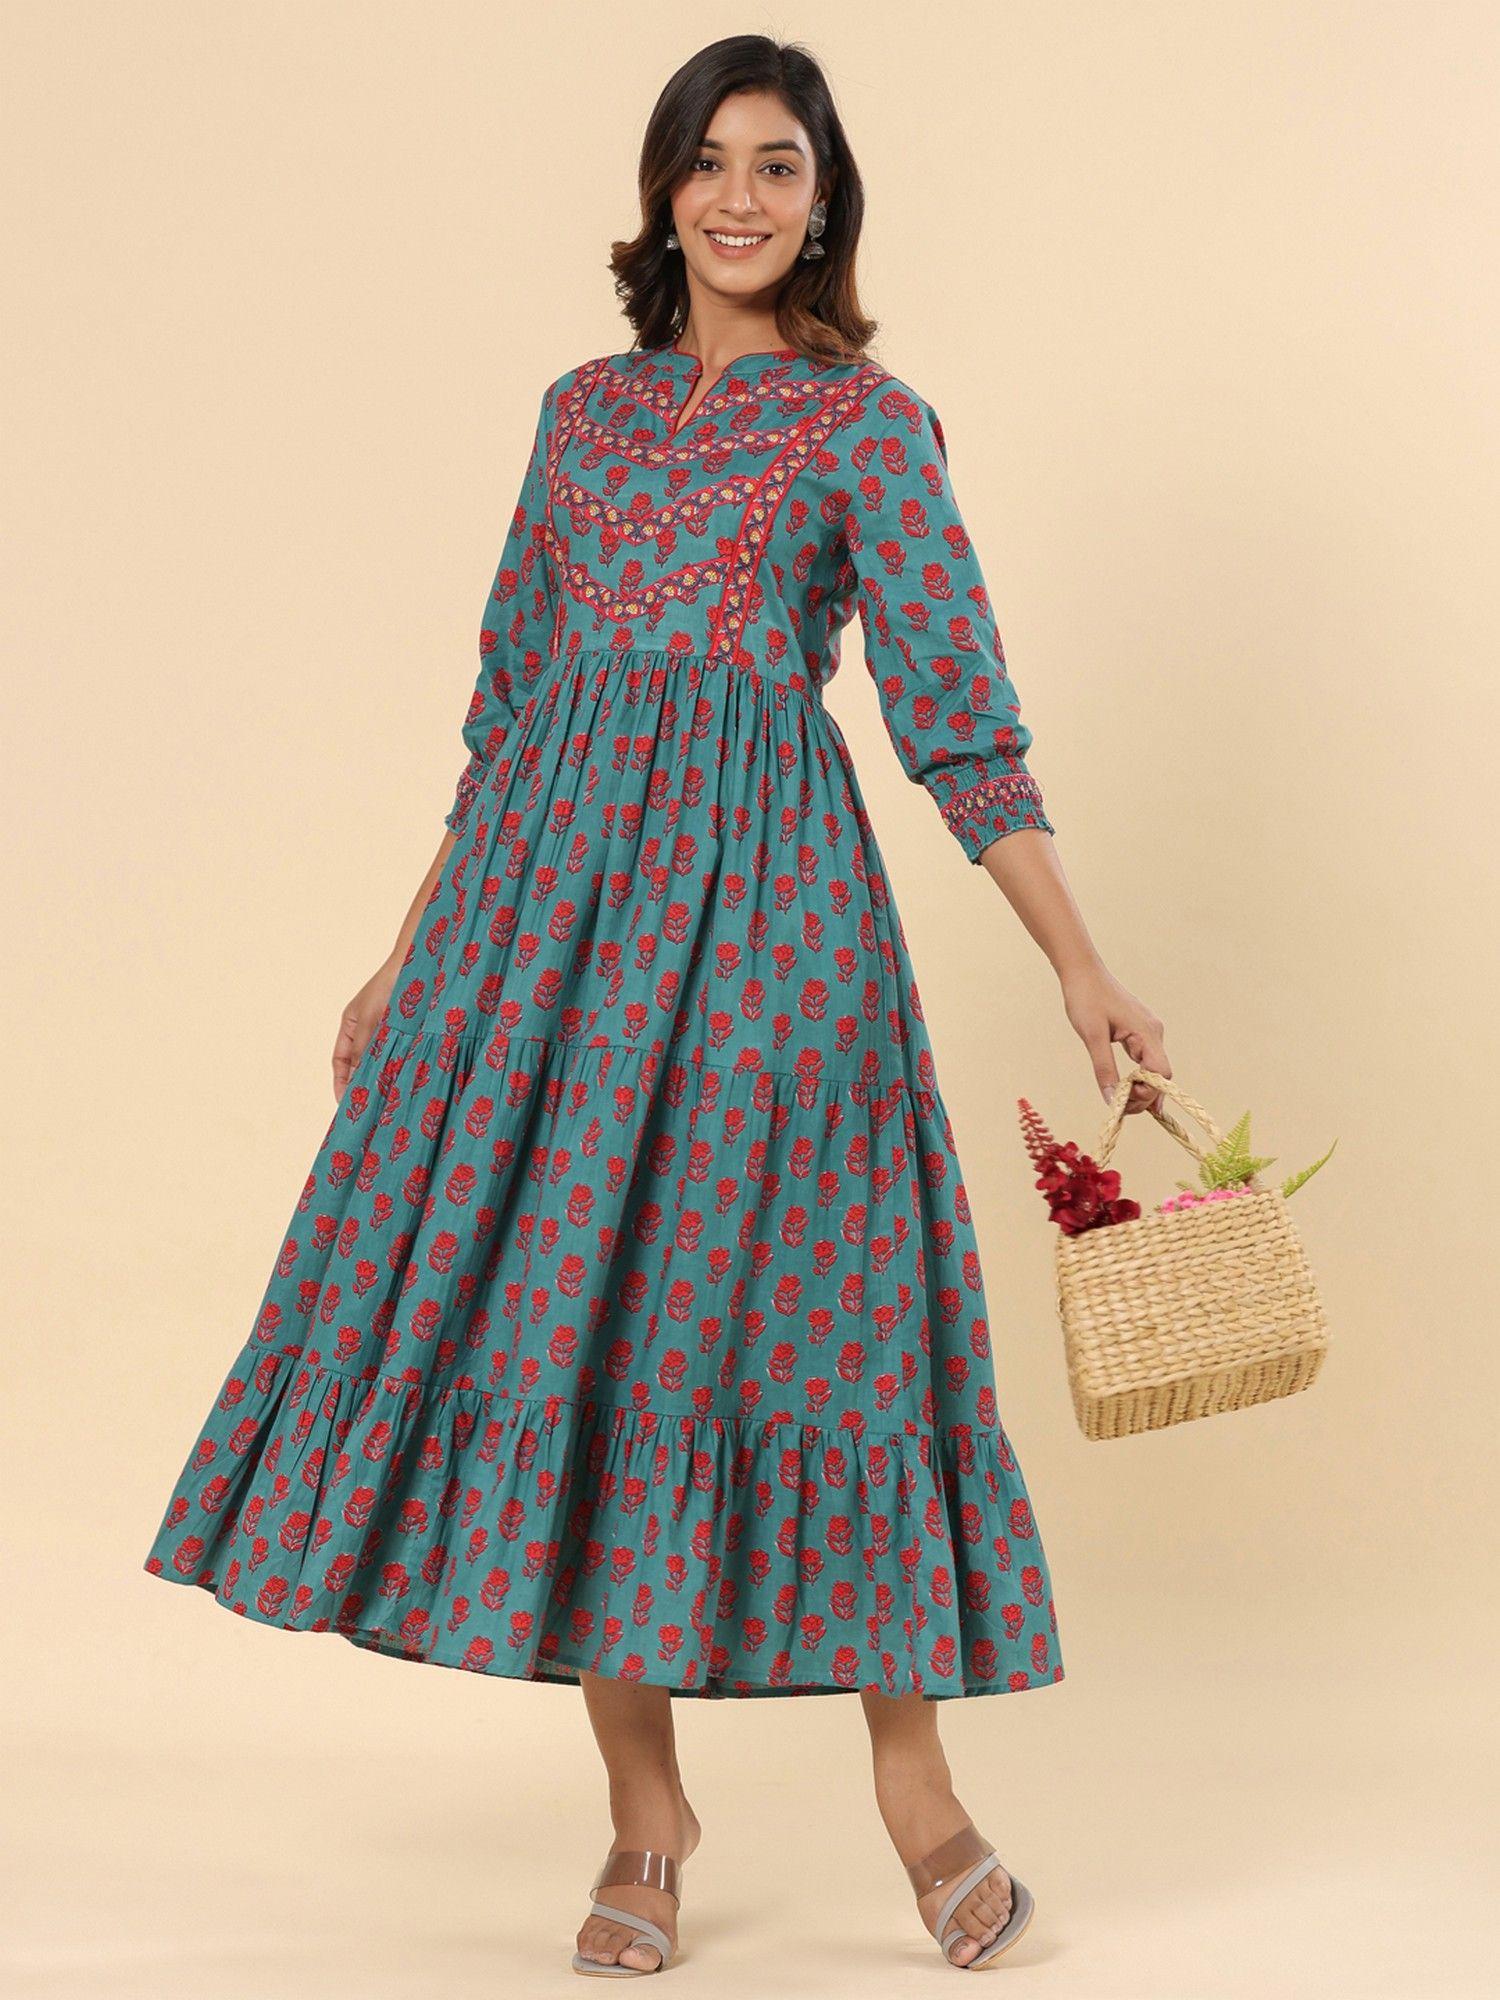 teal floral printed cotton ethnic tier dress